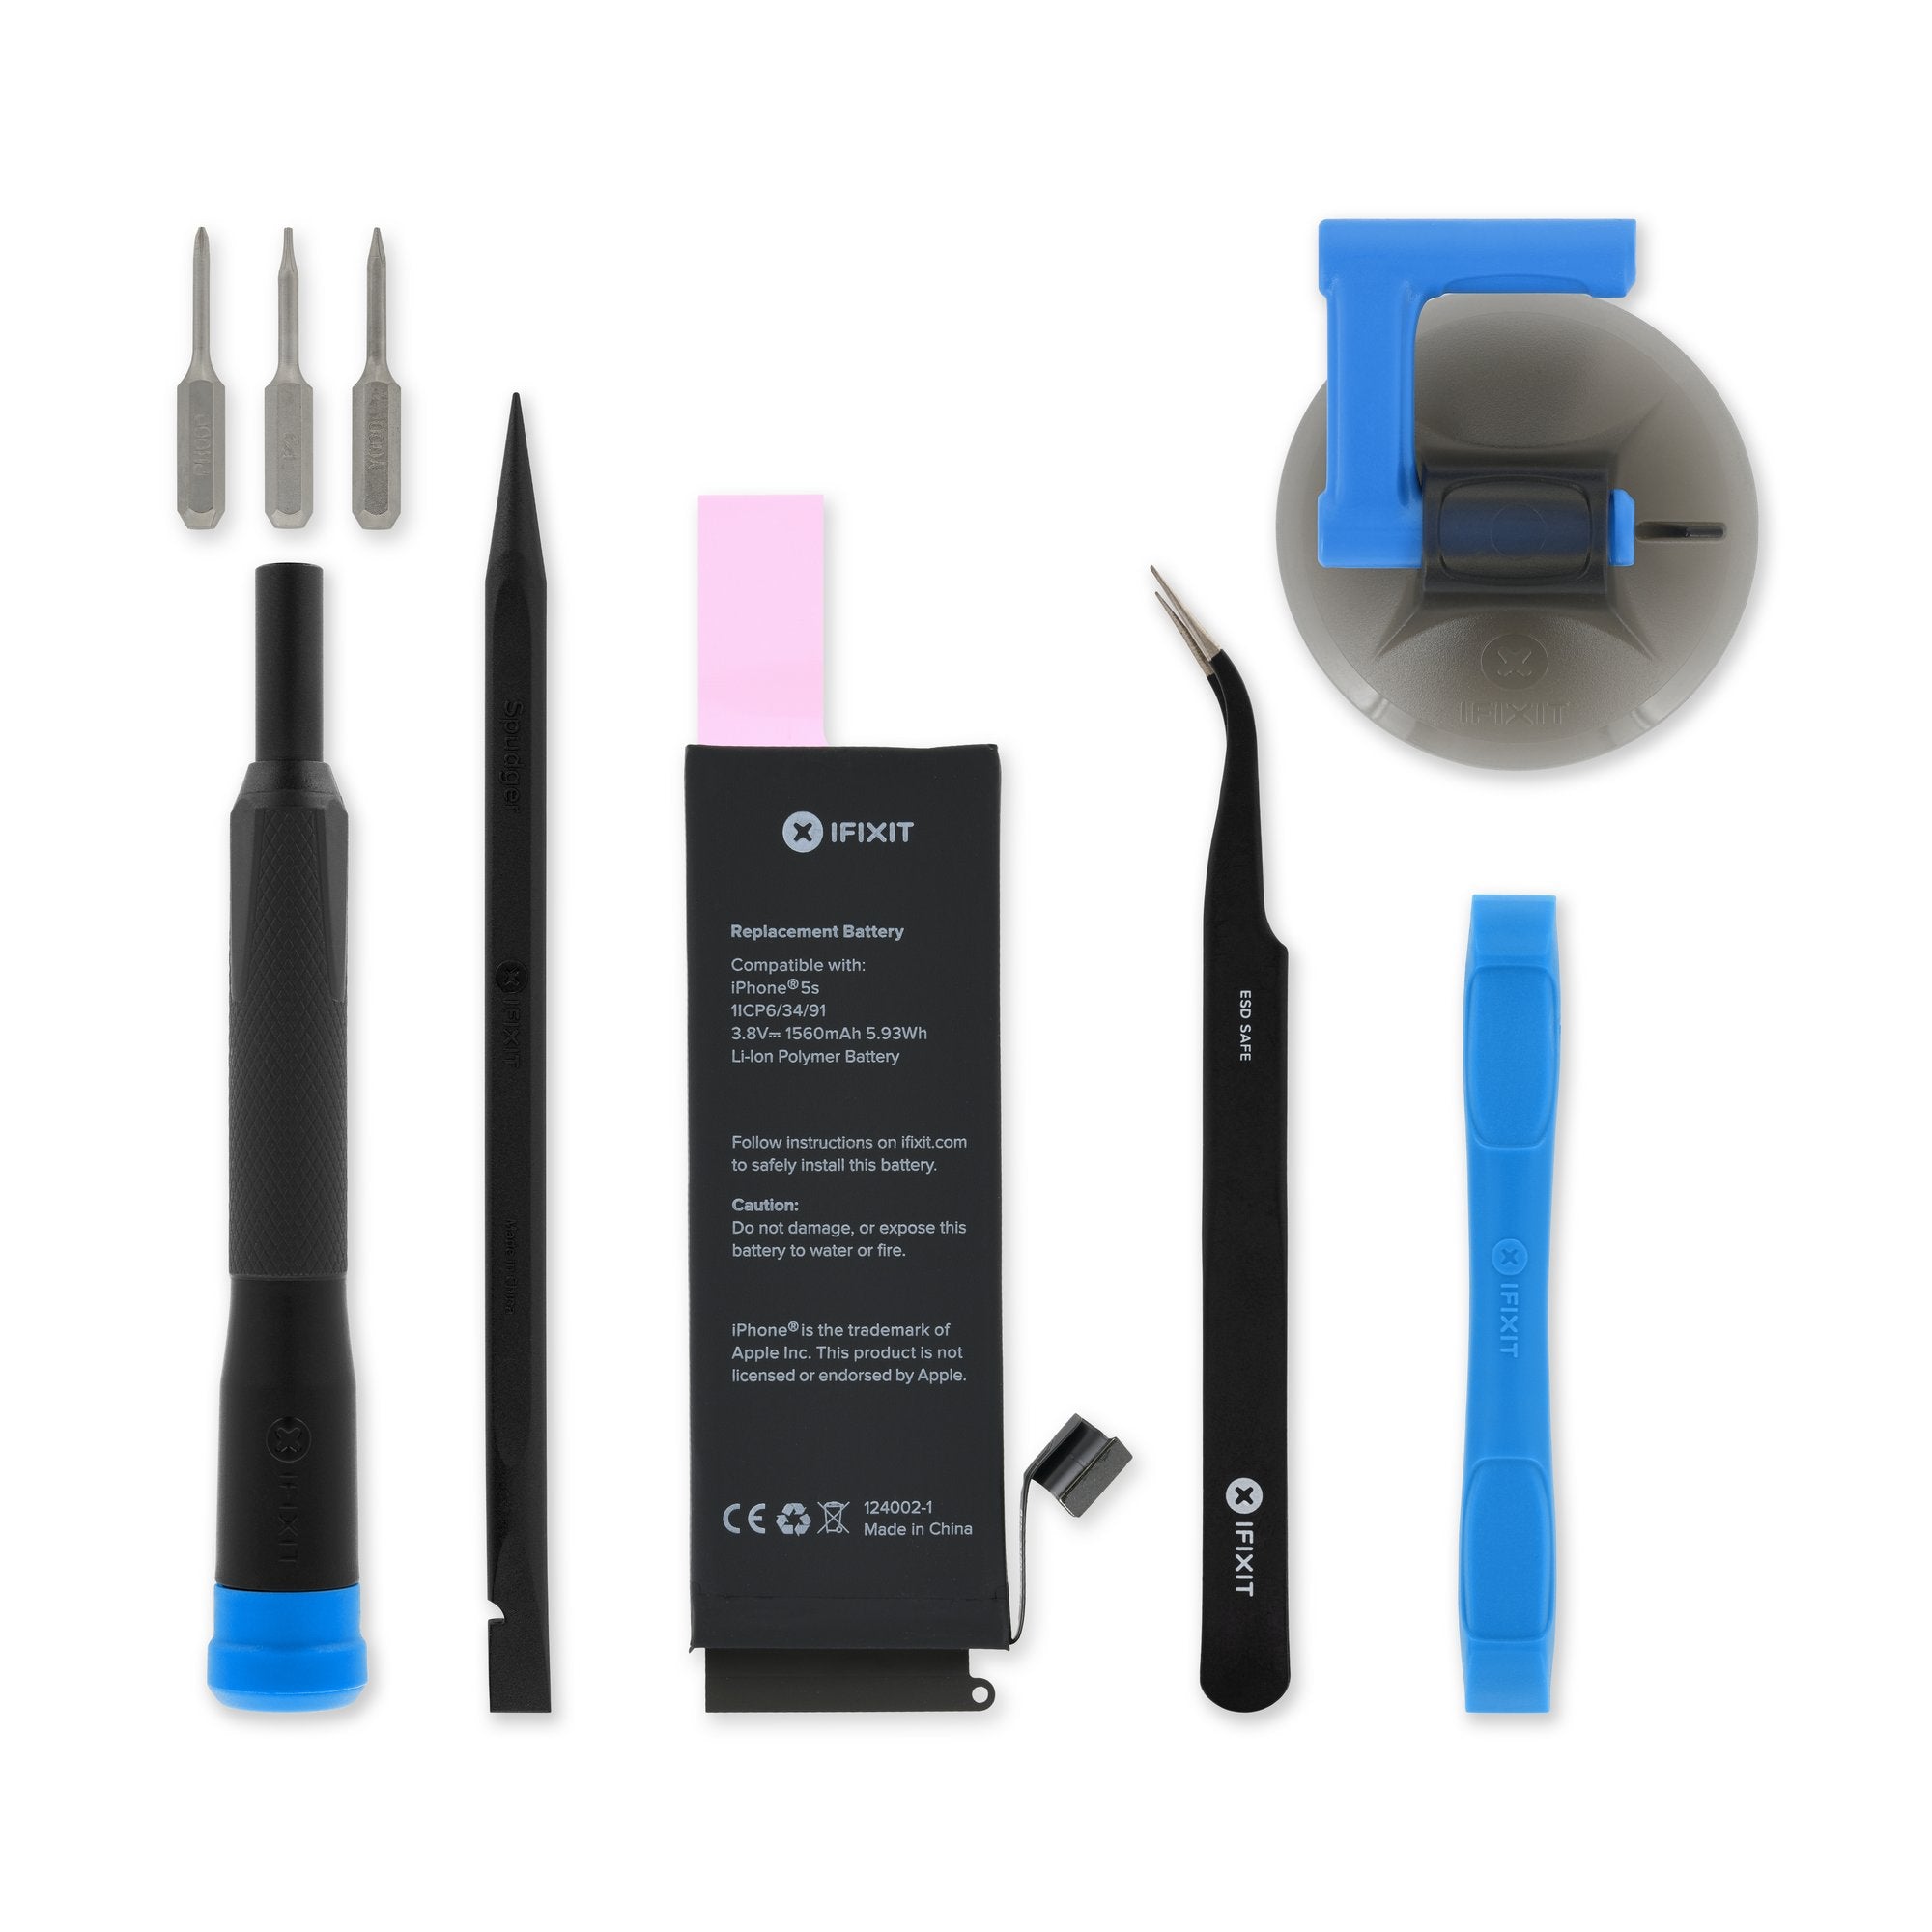 iPhone 5s Battery New Fix Kit